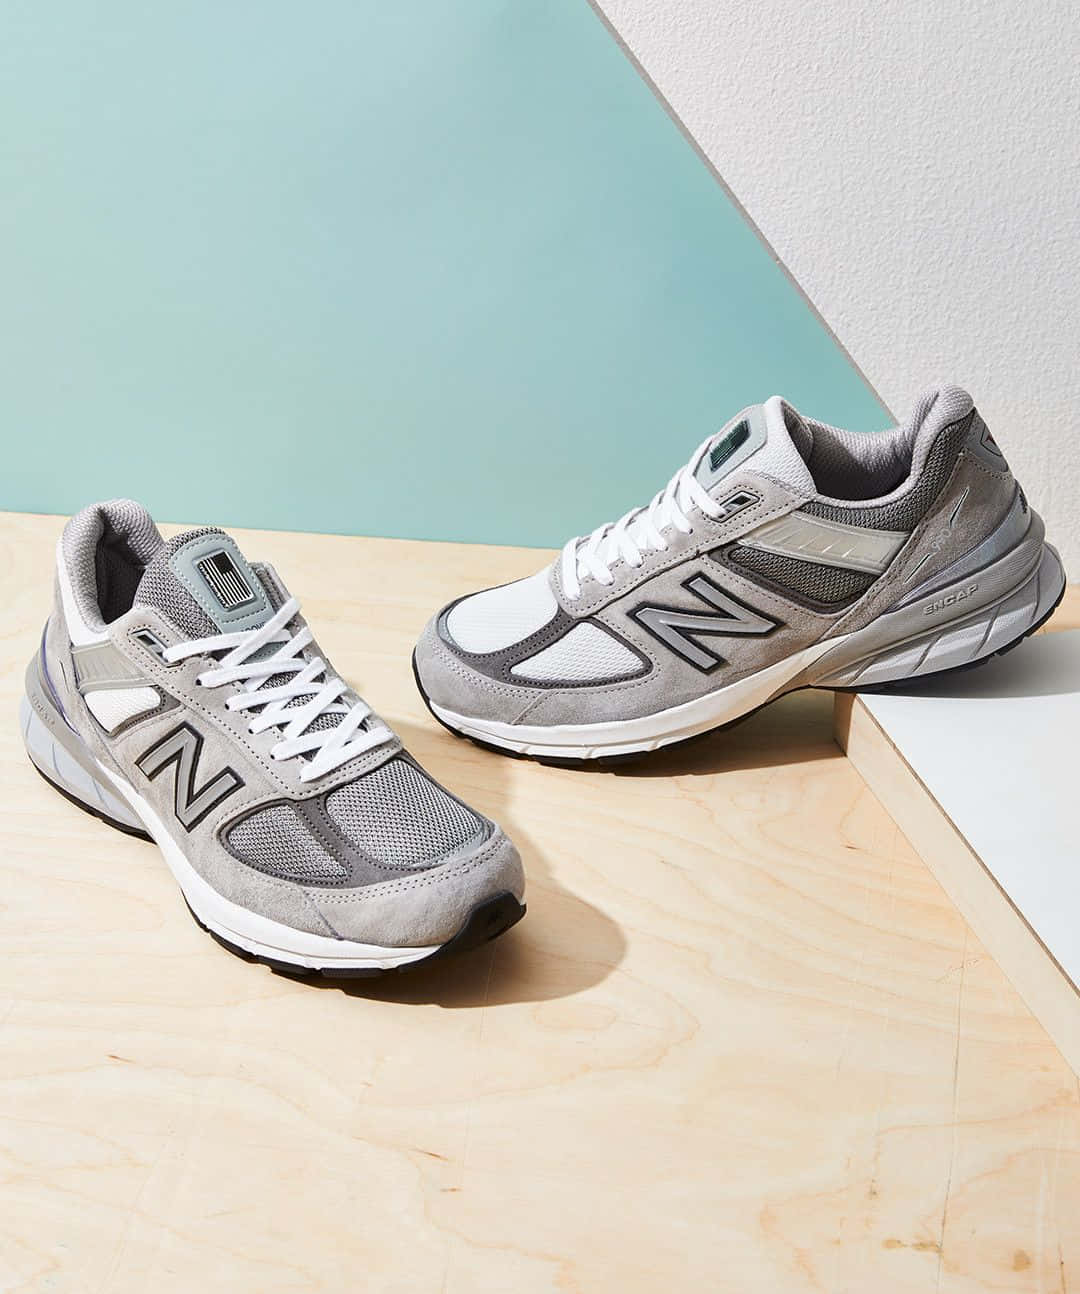 Step Up Your Game with Grey New Balance 990 Sneakers